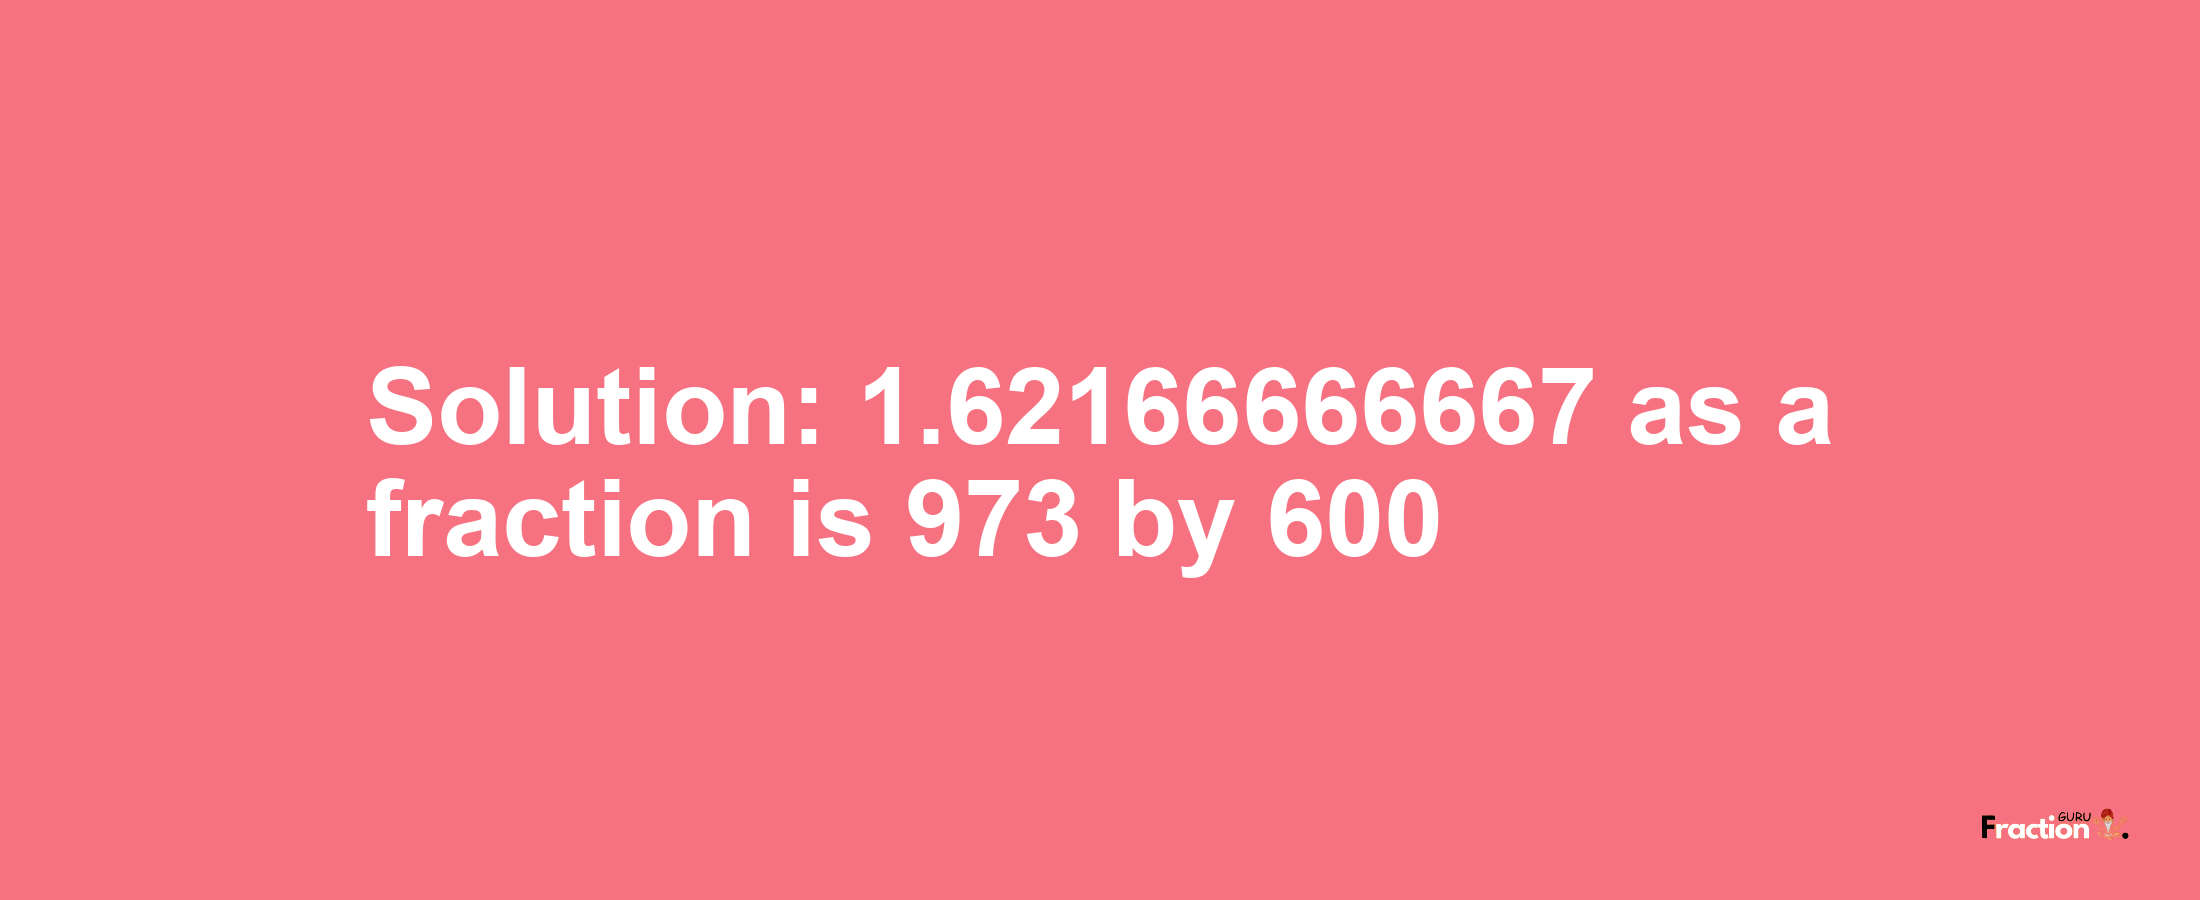 Solution:1.62166666667 as a fraction is 973/600